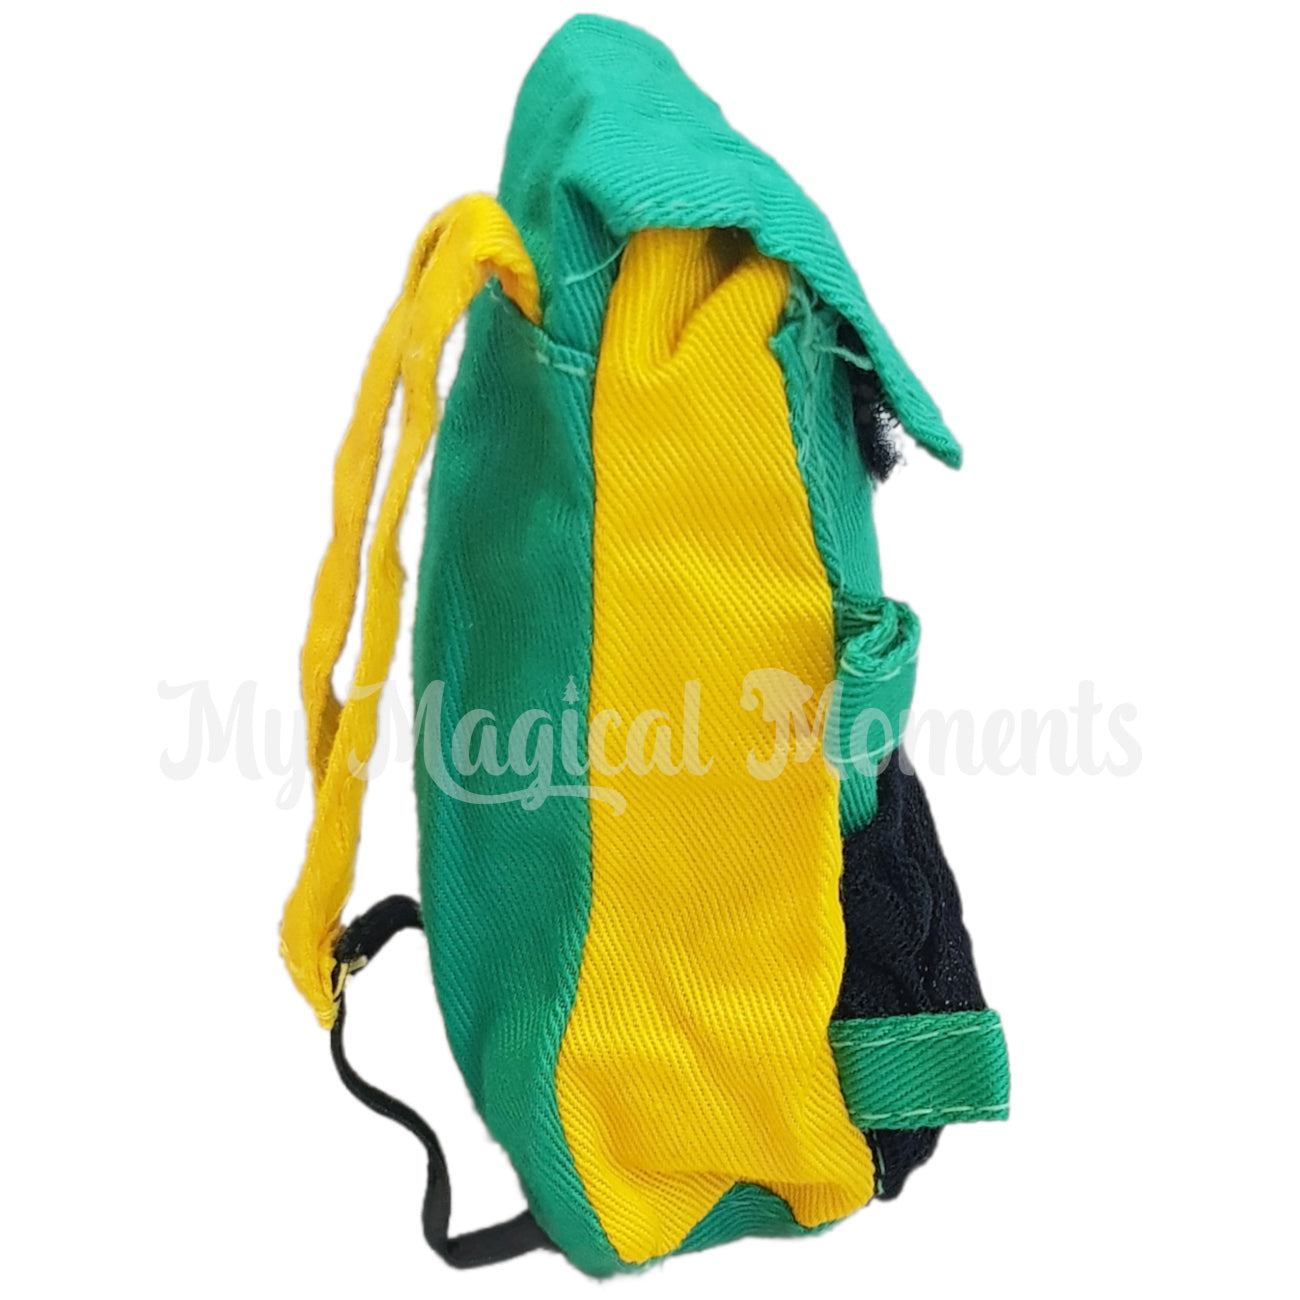 Miniature elf backpack. Green bag with yellow sides and mesh front pocket side view